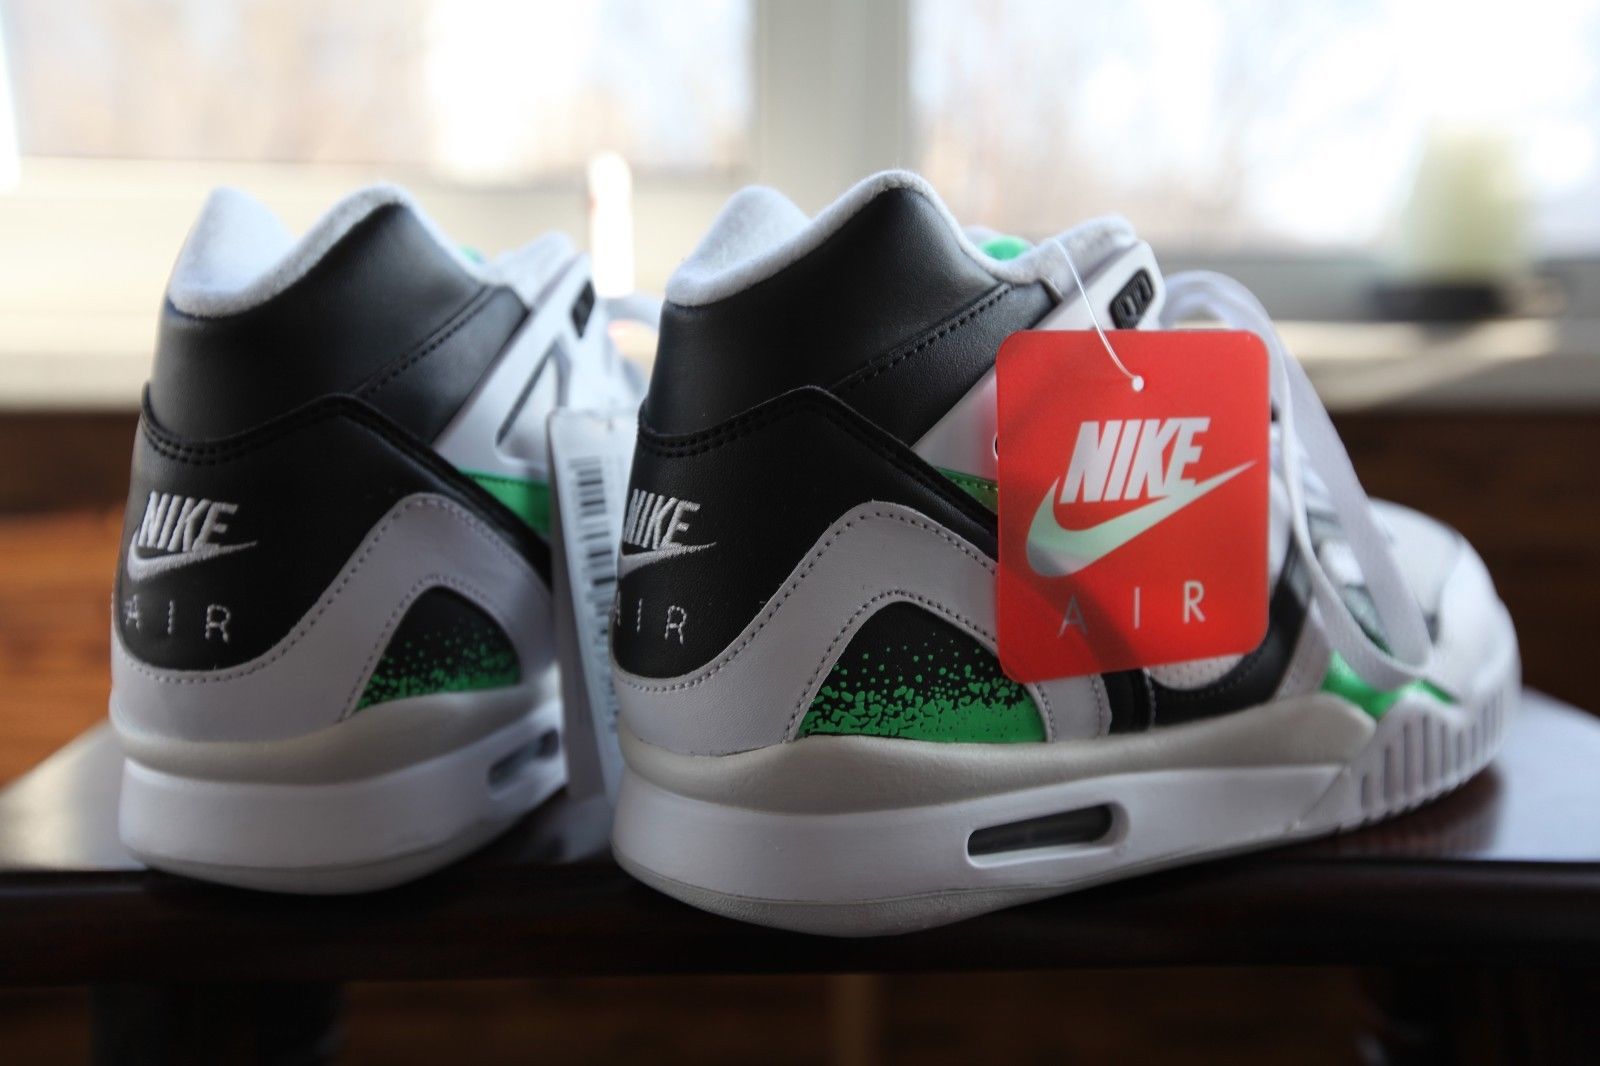 Nike Air Tech Challenge II “Poison Green” – Available on Ebay